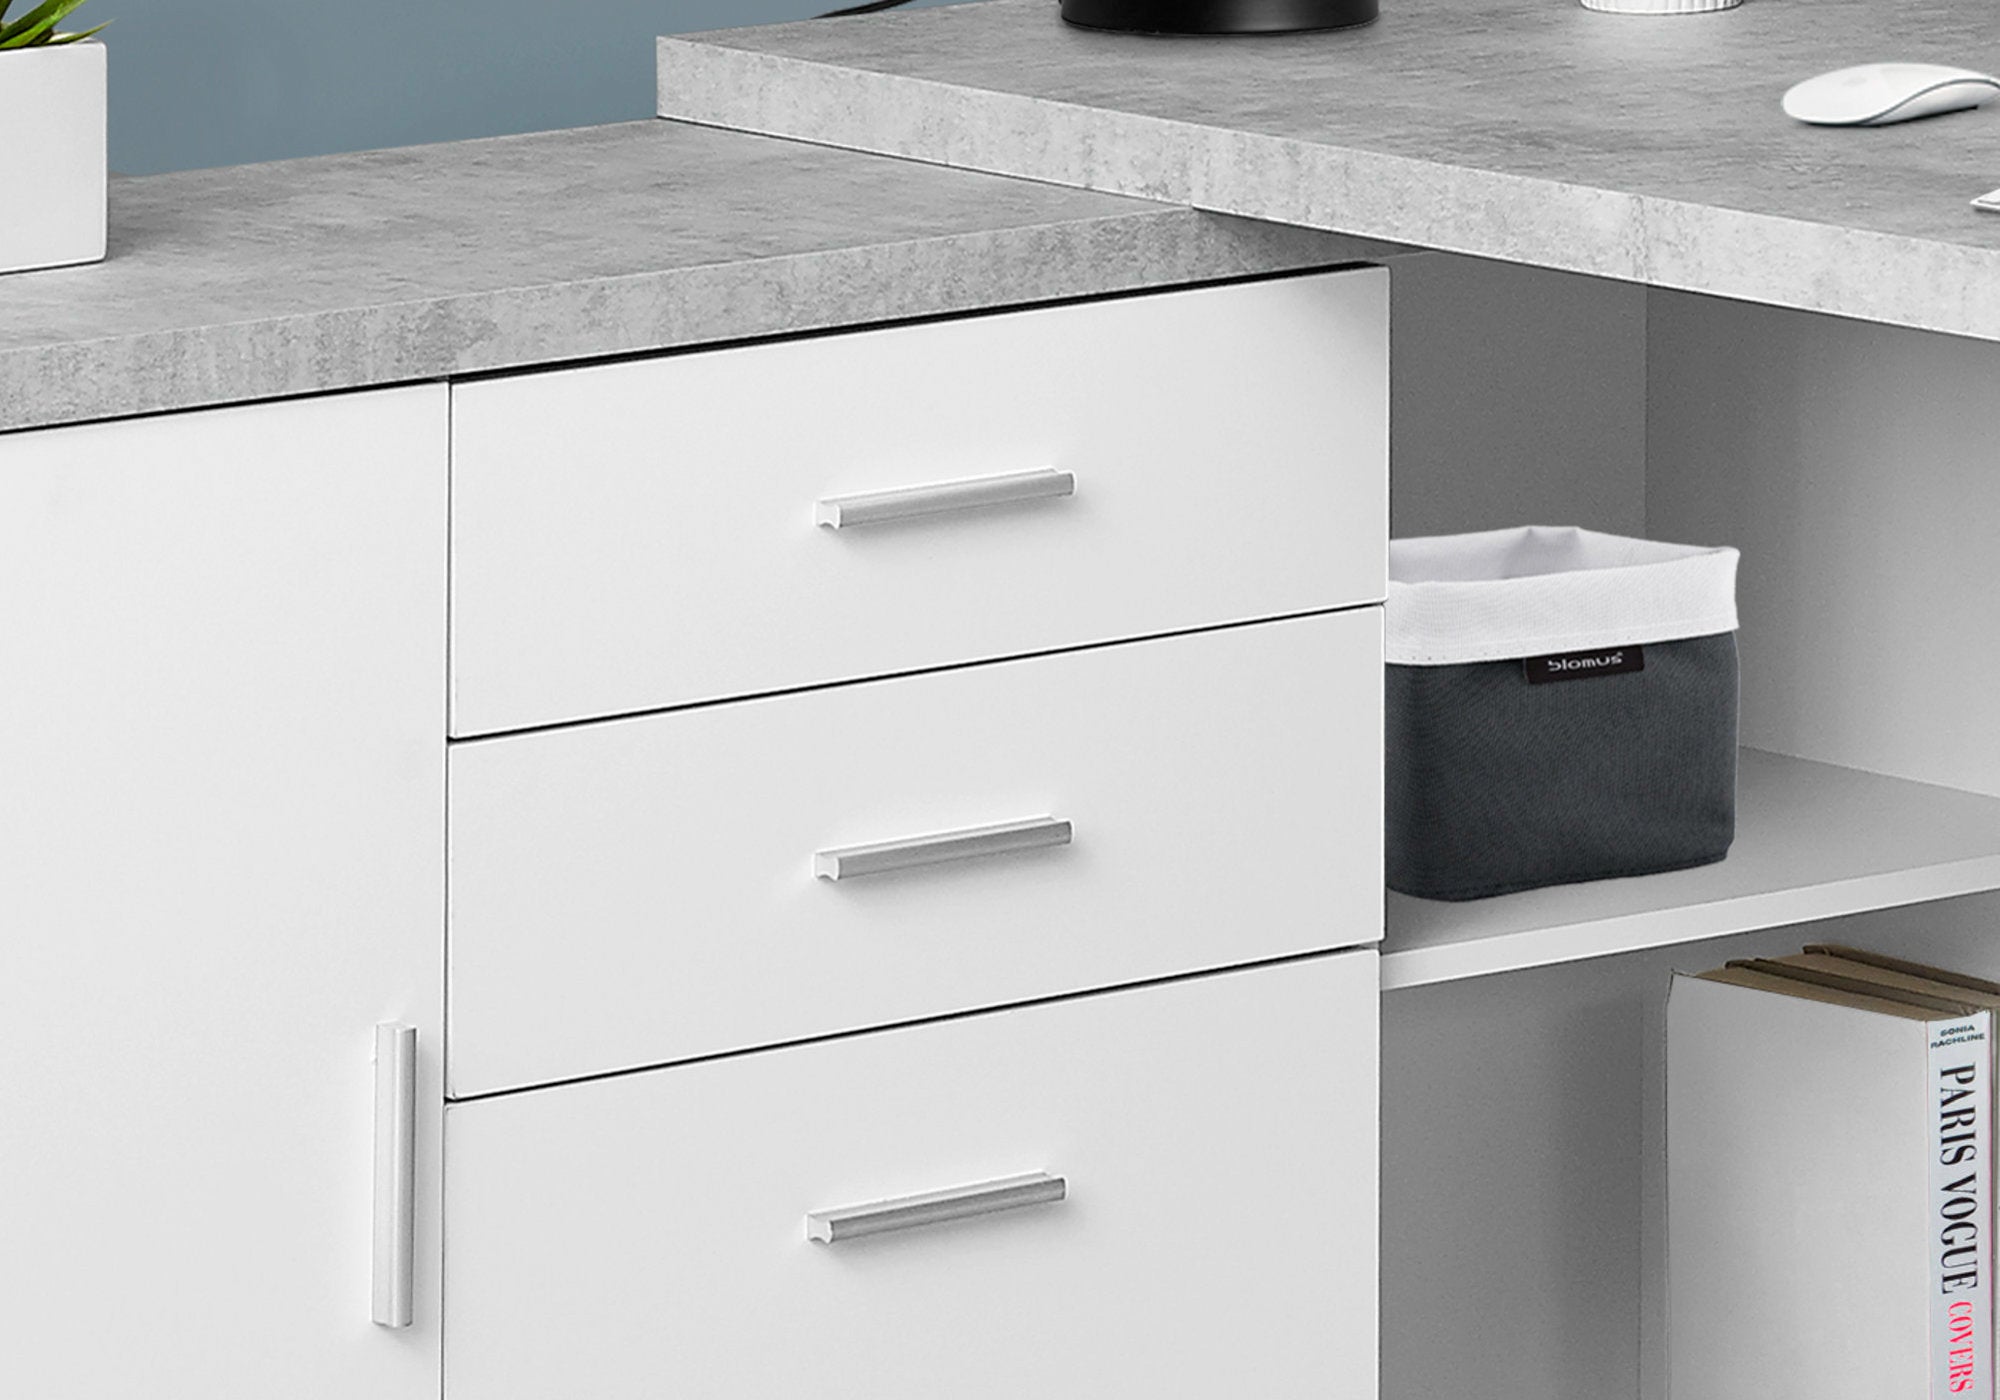 MN-887288    Computer Desk, Home Office, Corner, Left, Right Set-Up, Storage Drawers, 60"L, L Shape, Metal, Laminate, Grey Cement Look, Grey, Contemporary, Modern